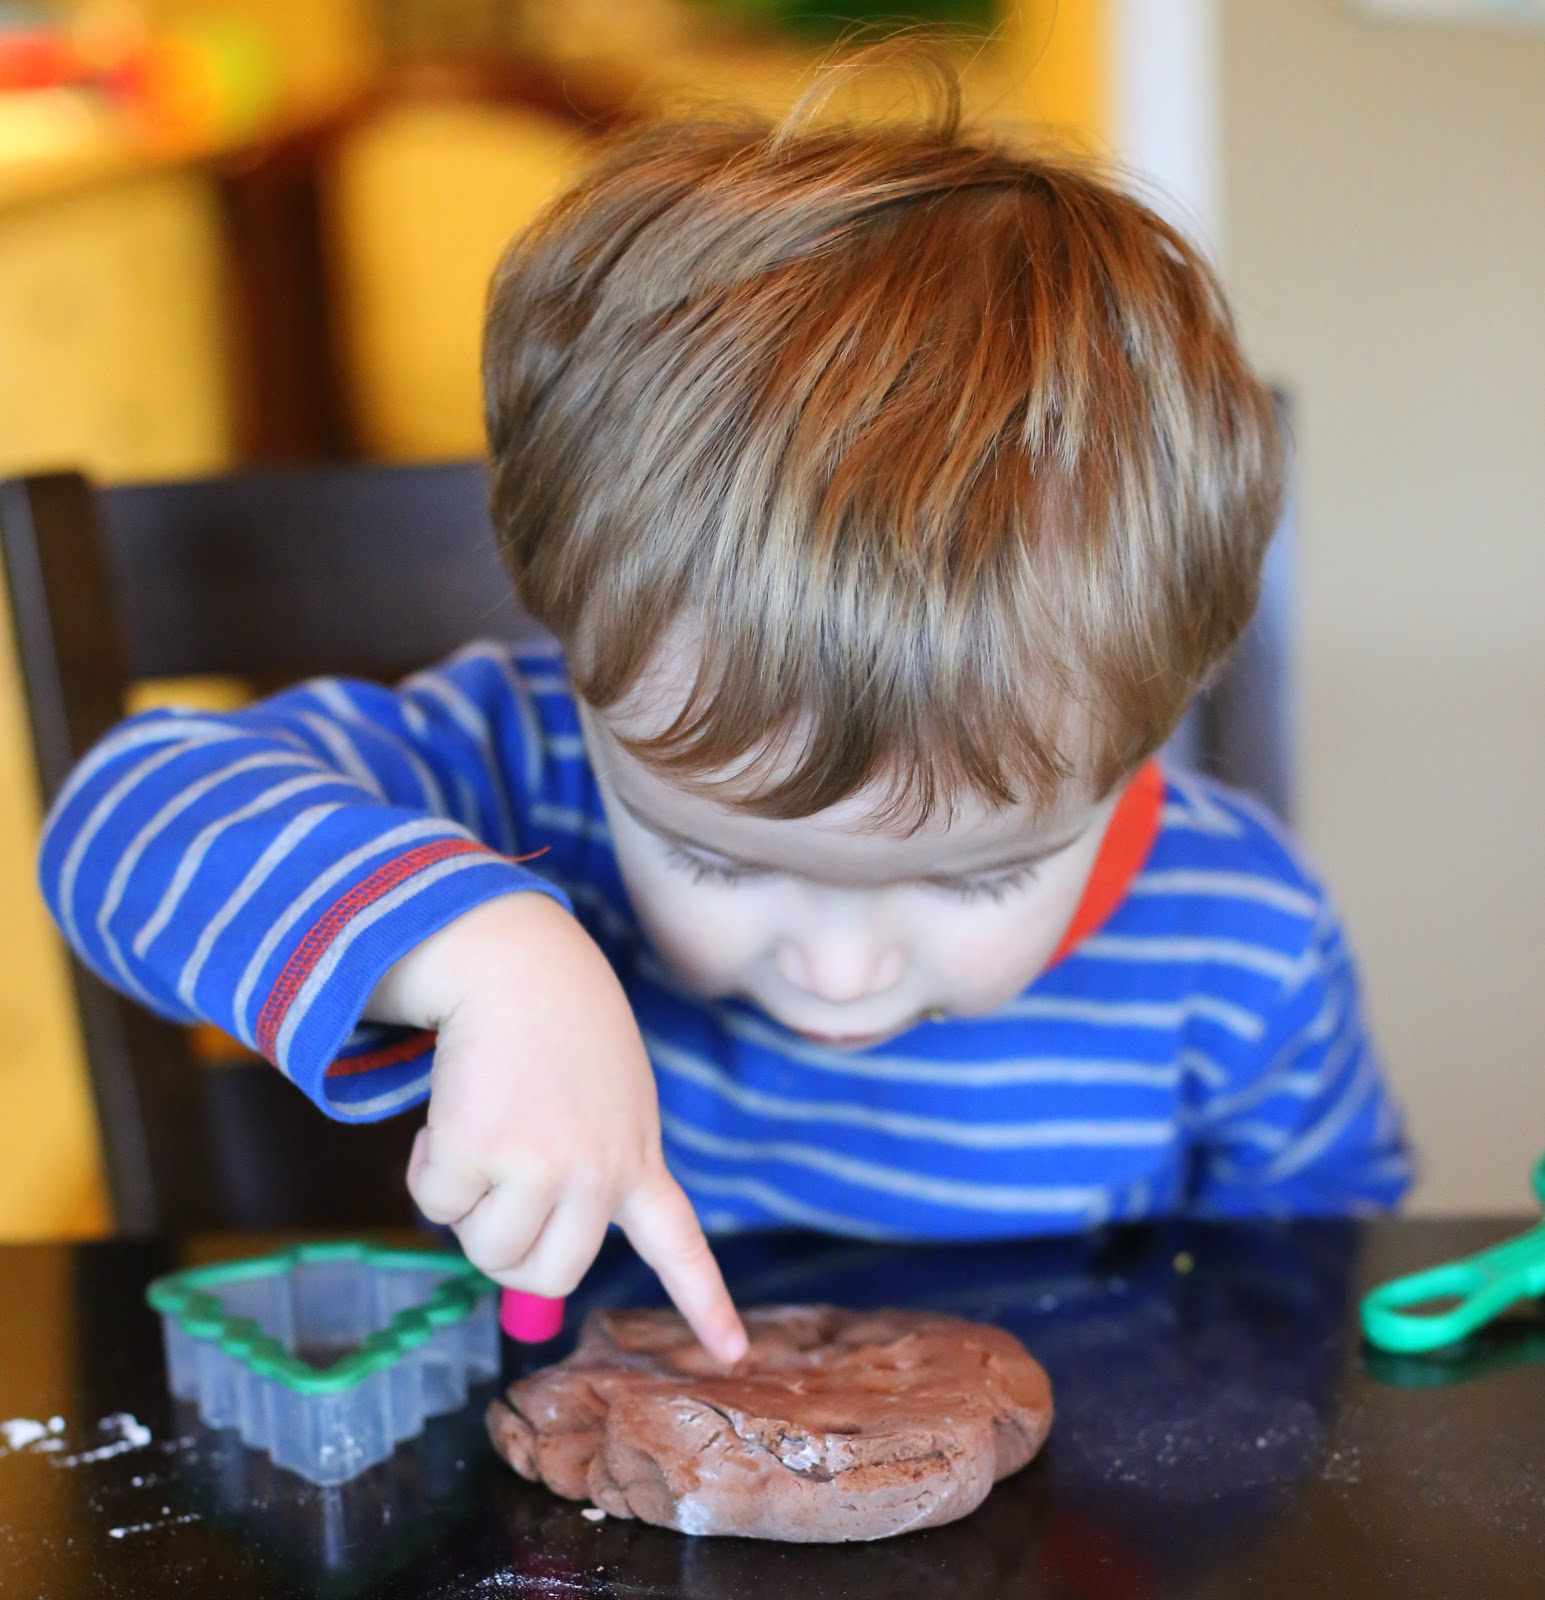 A new recipe for Chocolate ornament dough.  Make some hot cocoa and settle in for some delicious smelling homemade ornament creating!  From Fun at Home with Kids